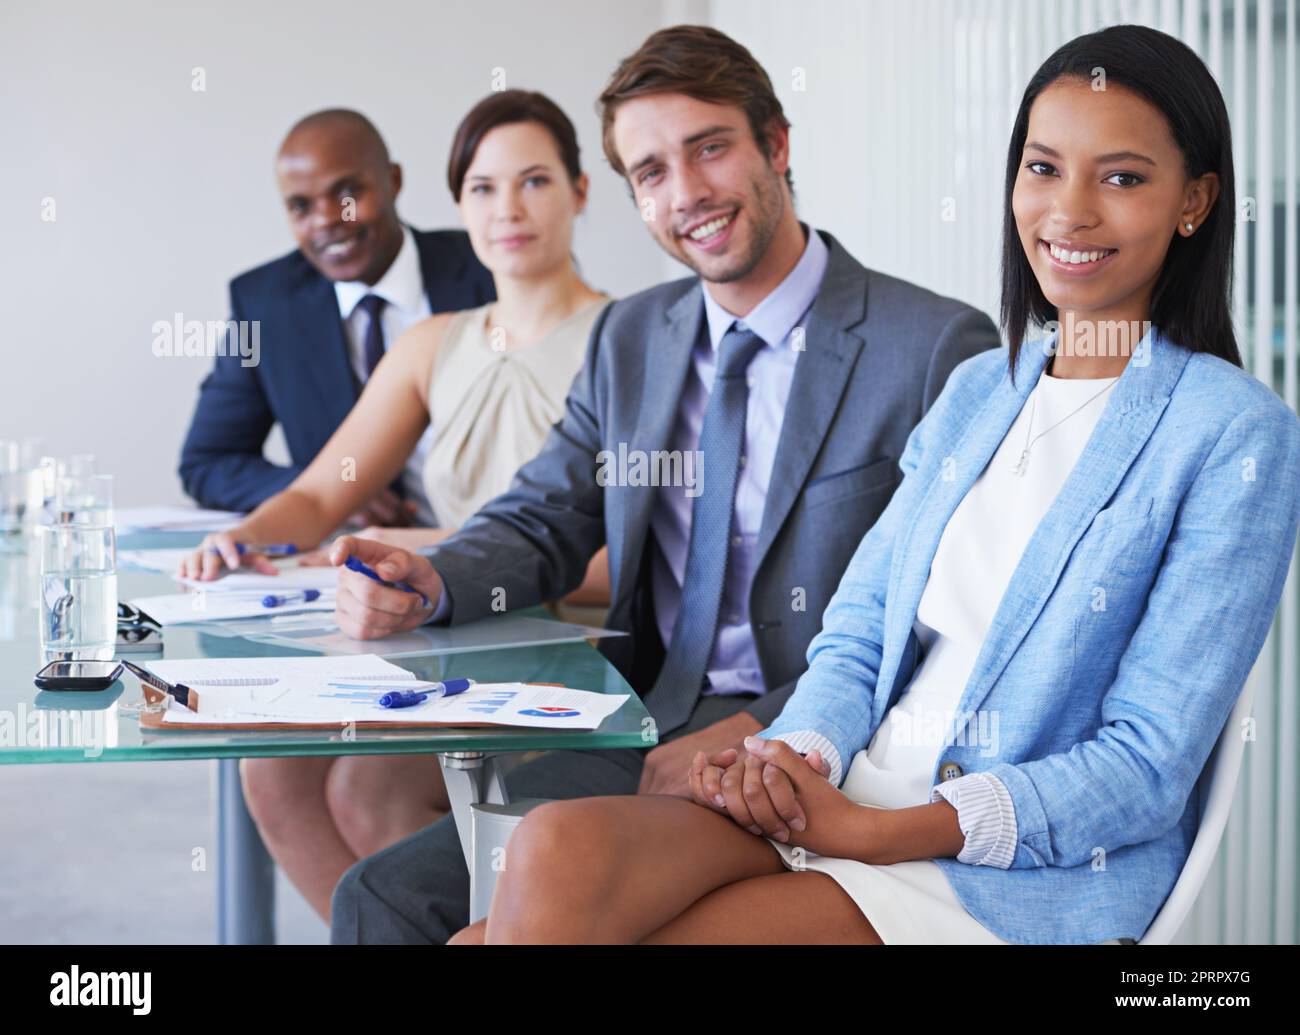 The financial experts. Portrait of a group of businesspeople sitting at a conference table. Stock Photo